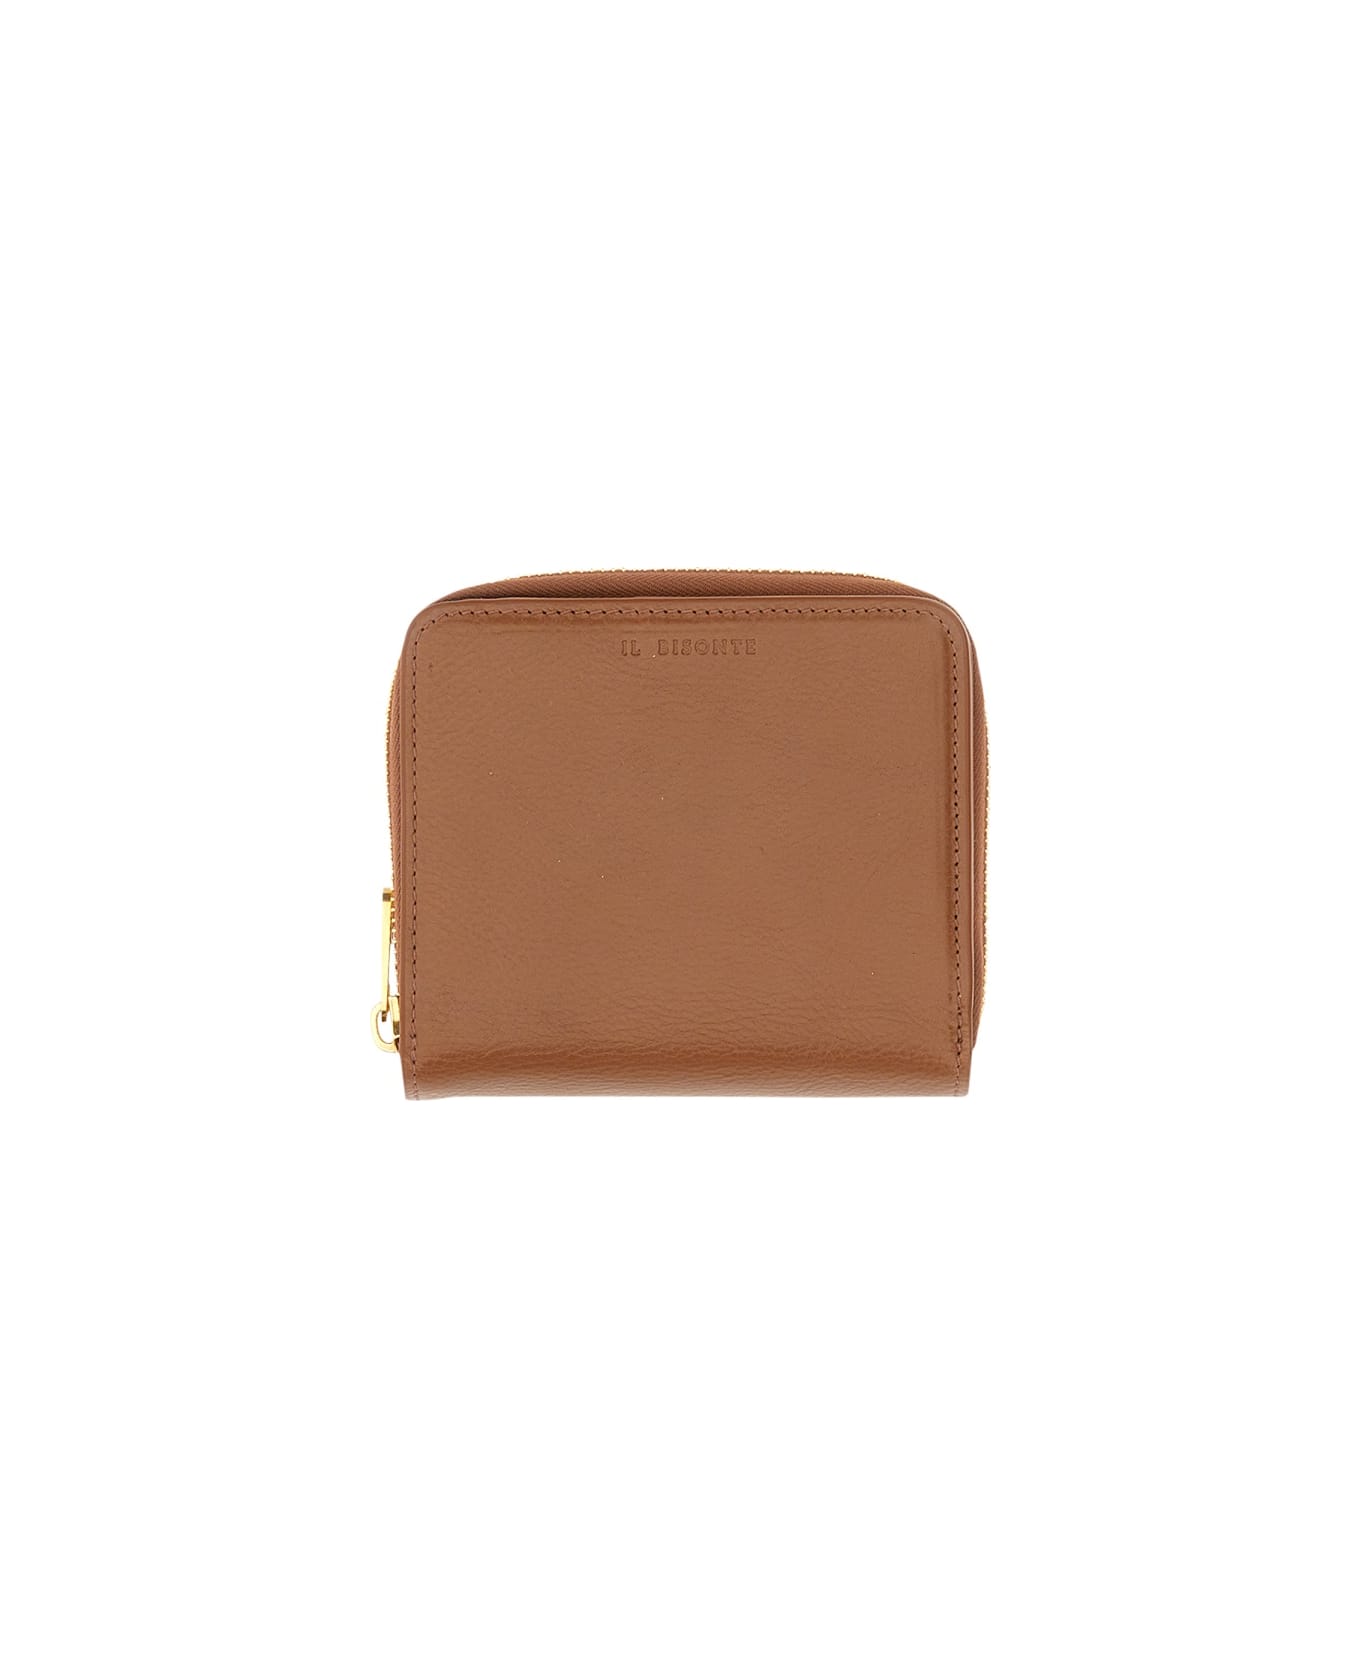 Il Bisonte Leather Wallet - BROWN